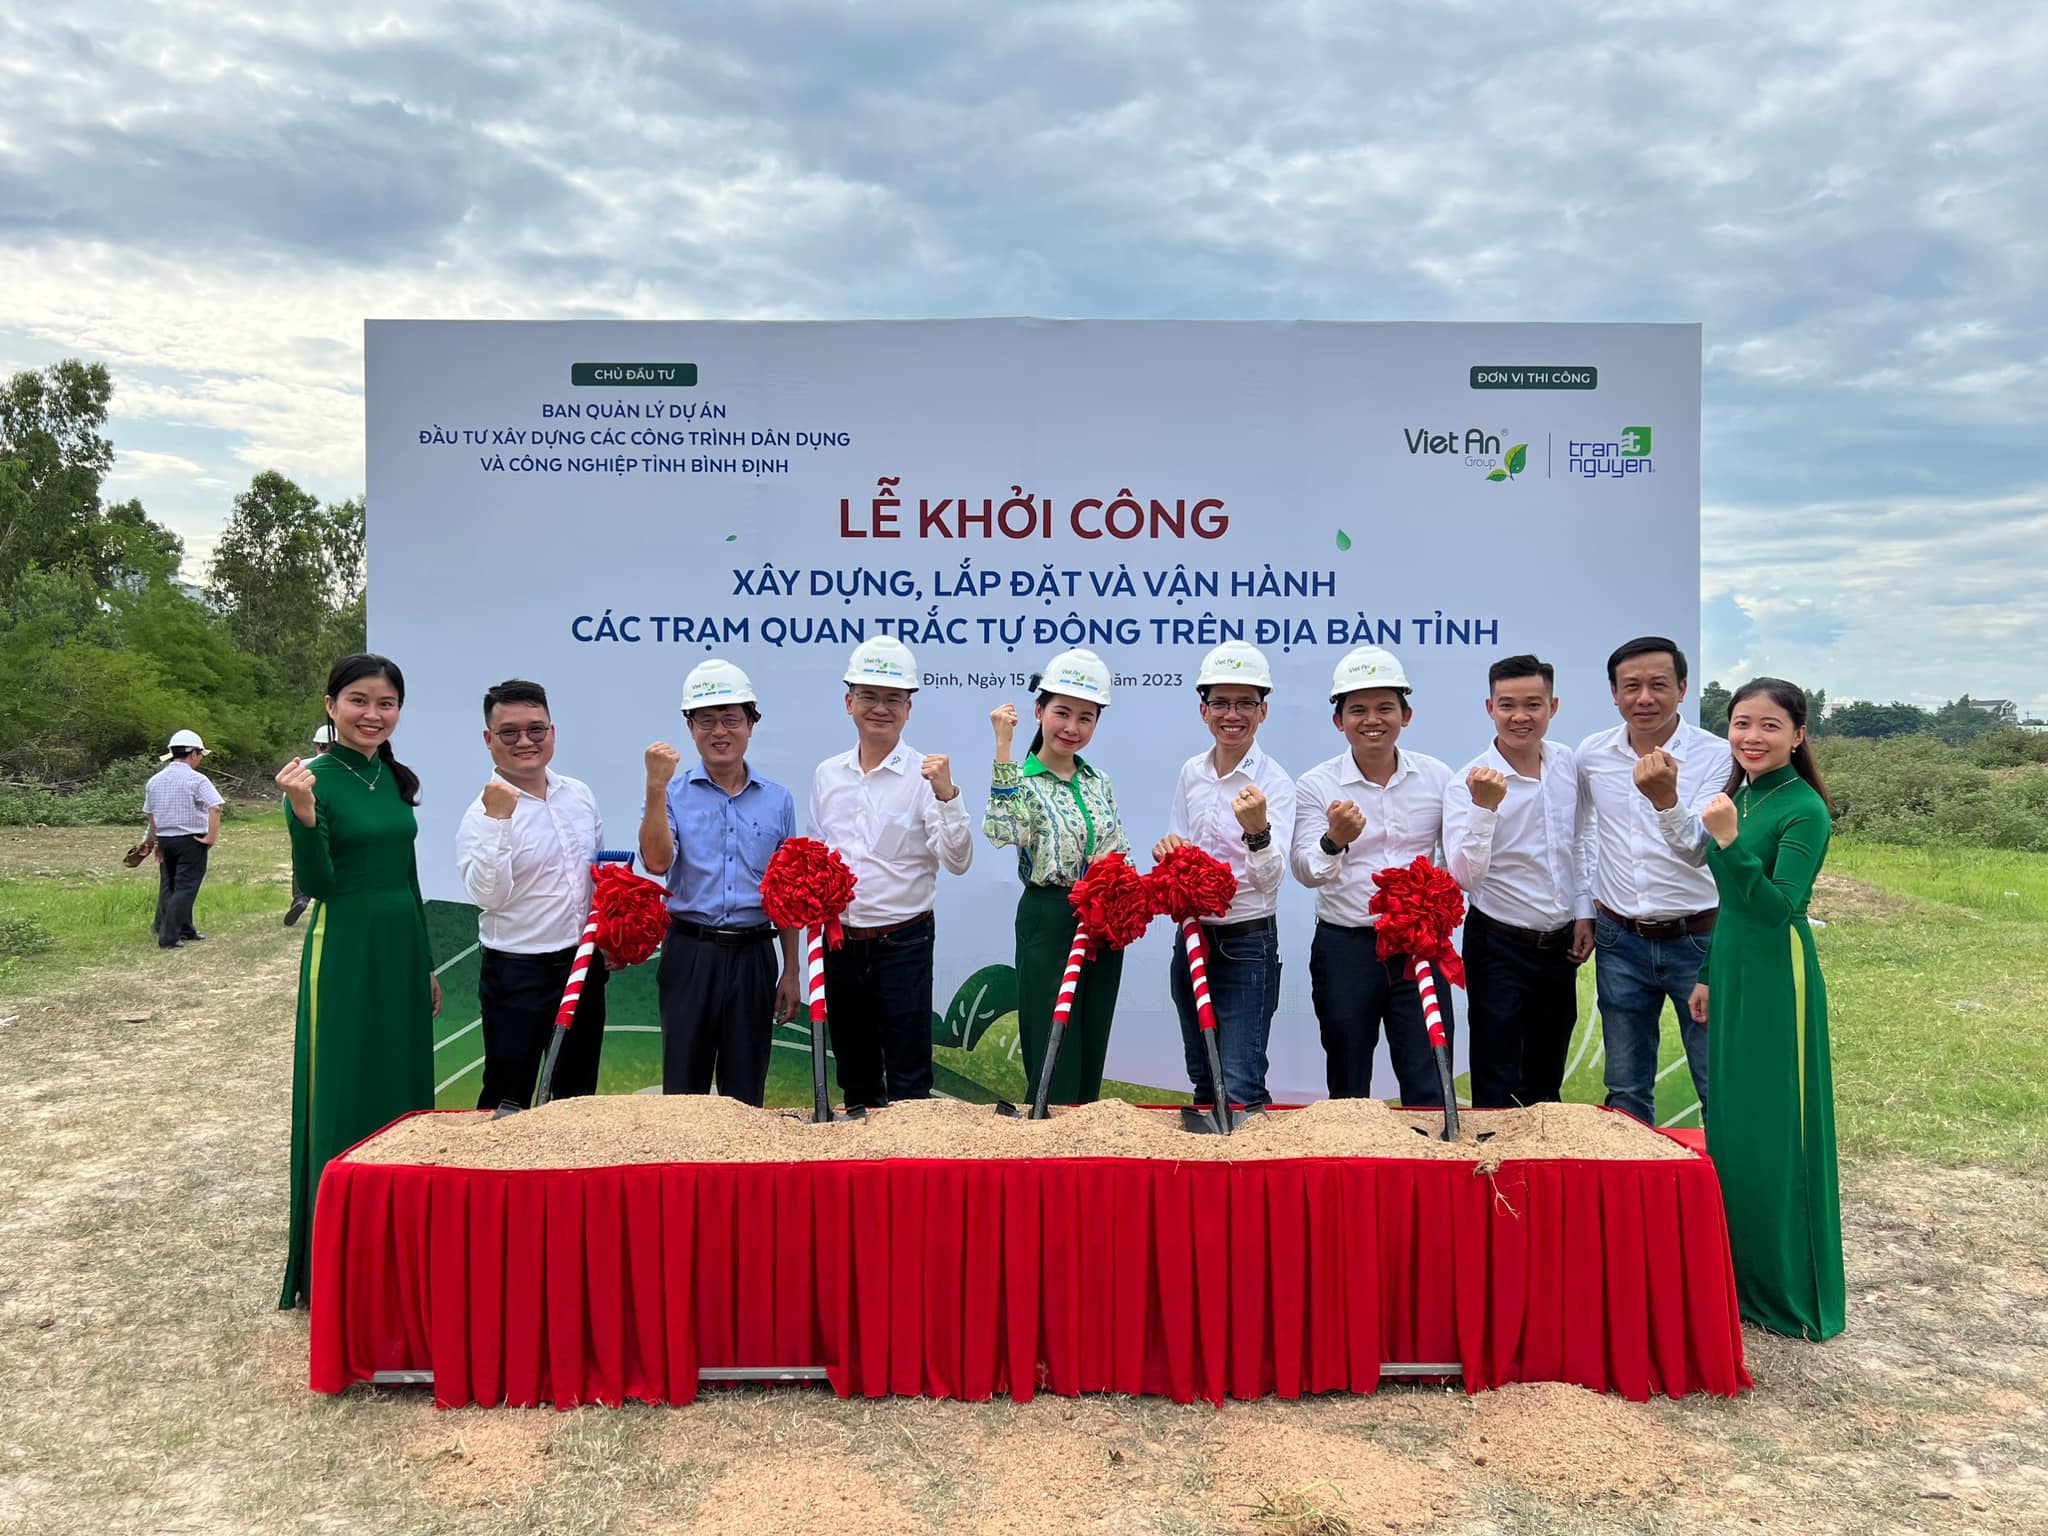 Groundbreaking ceremony for the project to install an environmental monitoring system in Binh Dinh province